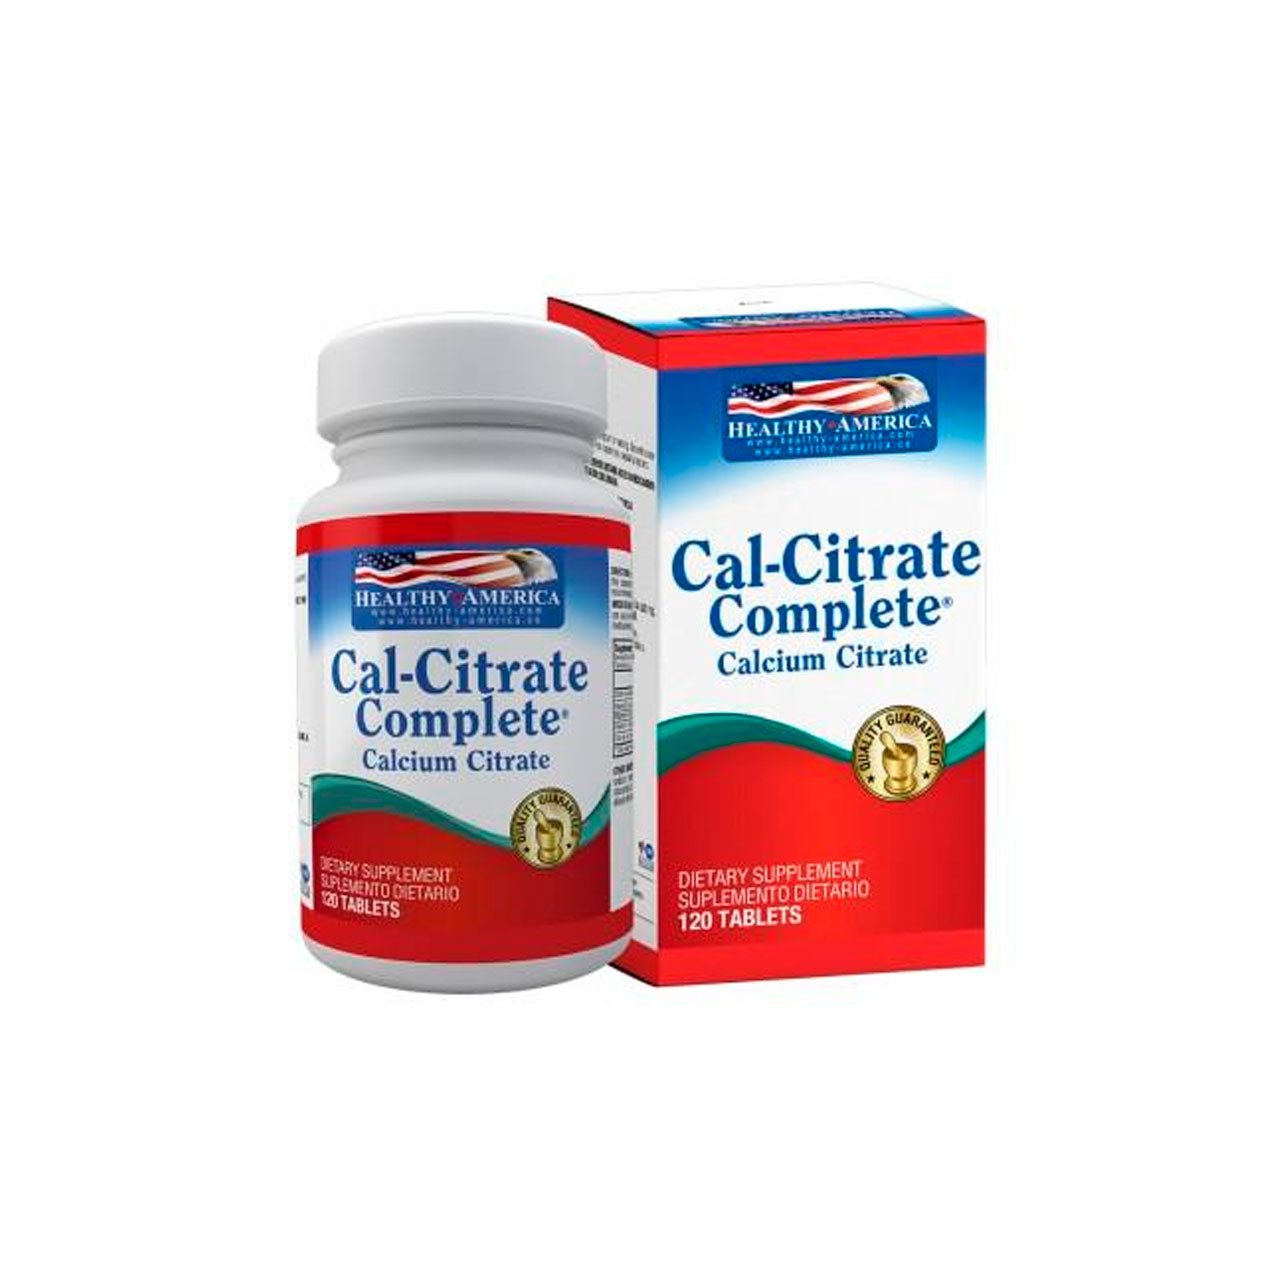 CALCITRATE X 120 TAB